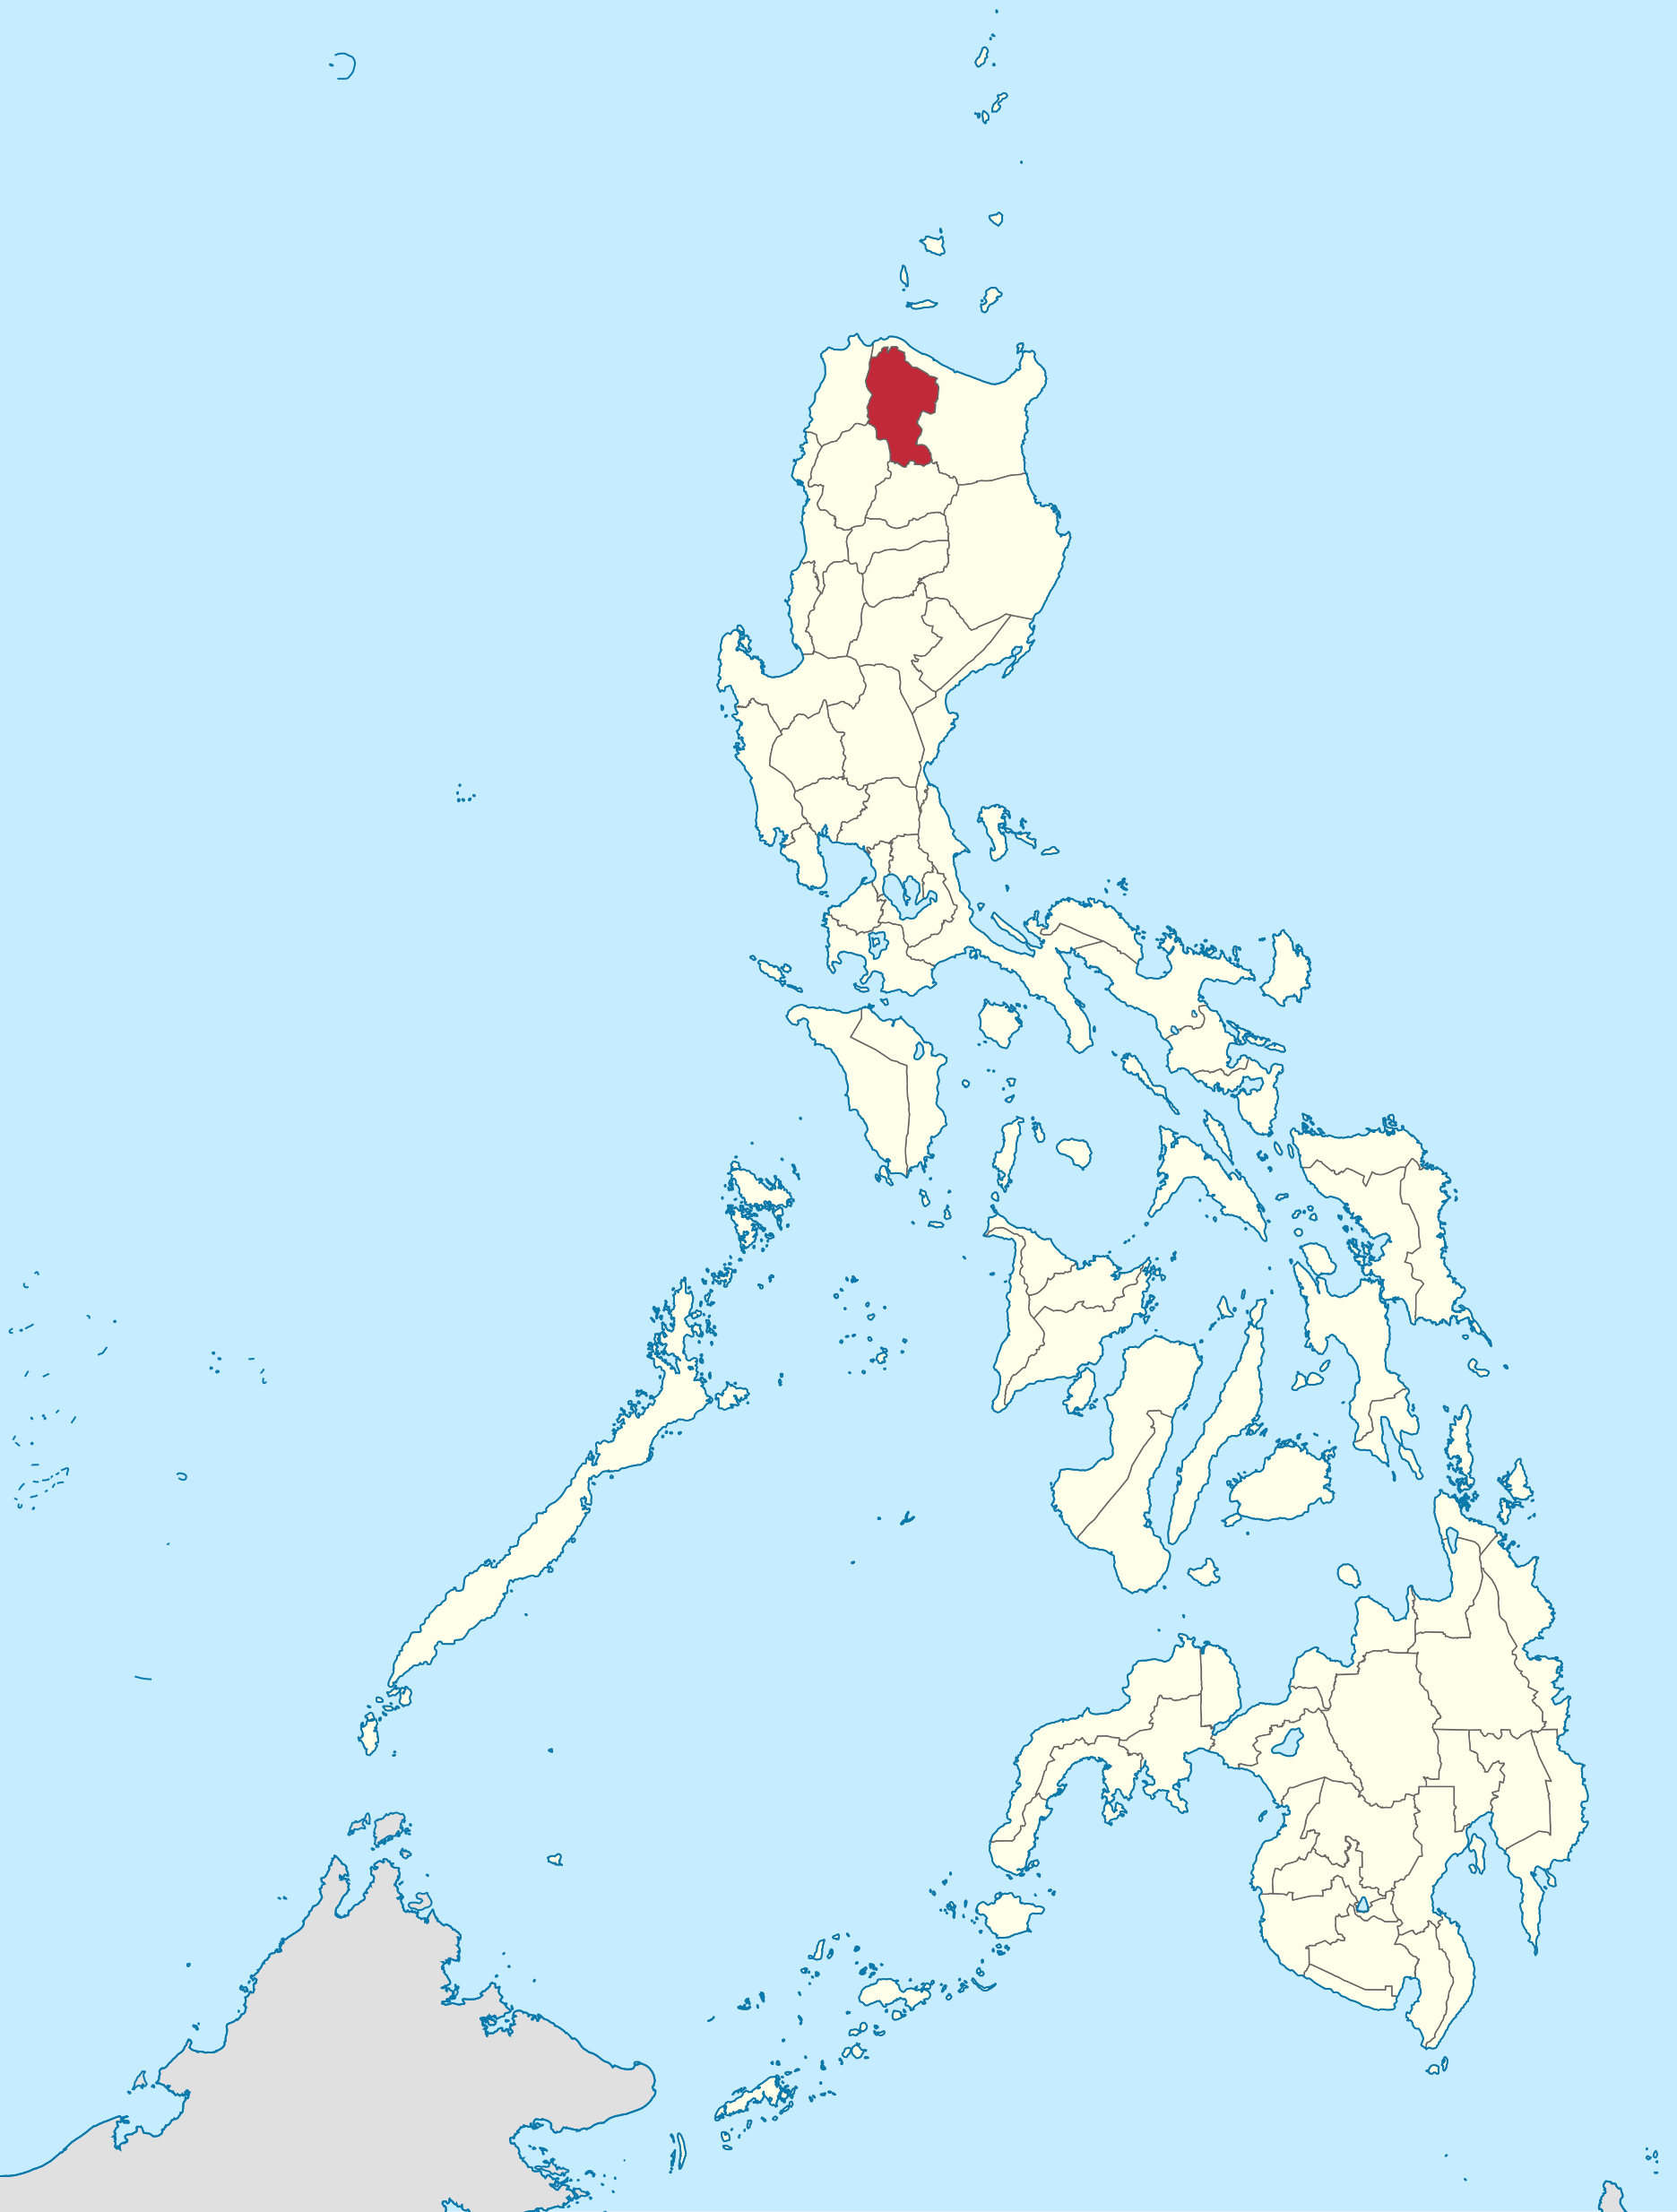 Apayao in Philippines.svg